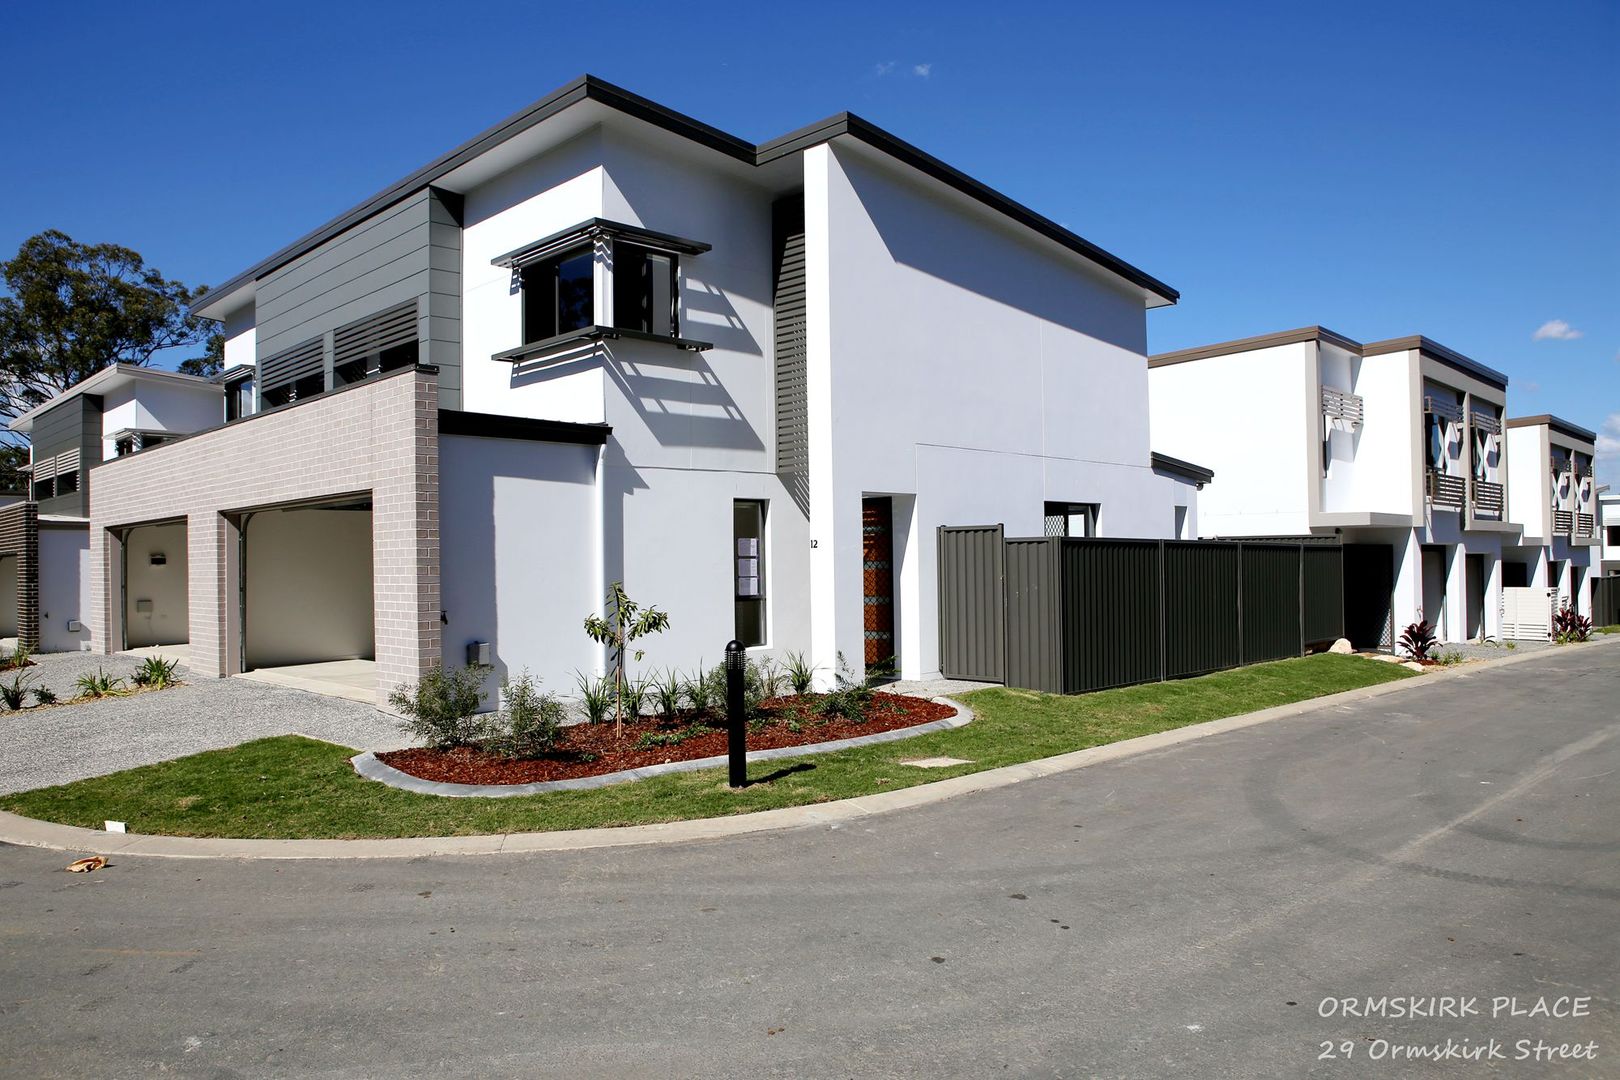 BRAND NEW "ORMSKIRK PLACE" THOWNHOMES AVAILAVLE NOW, Calamvale QLD 4116, Image 2